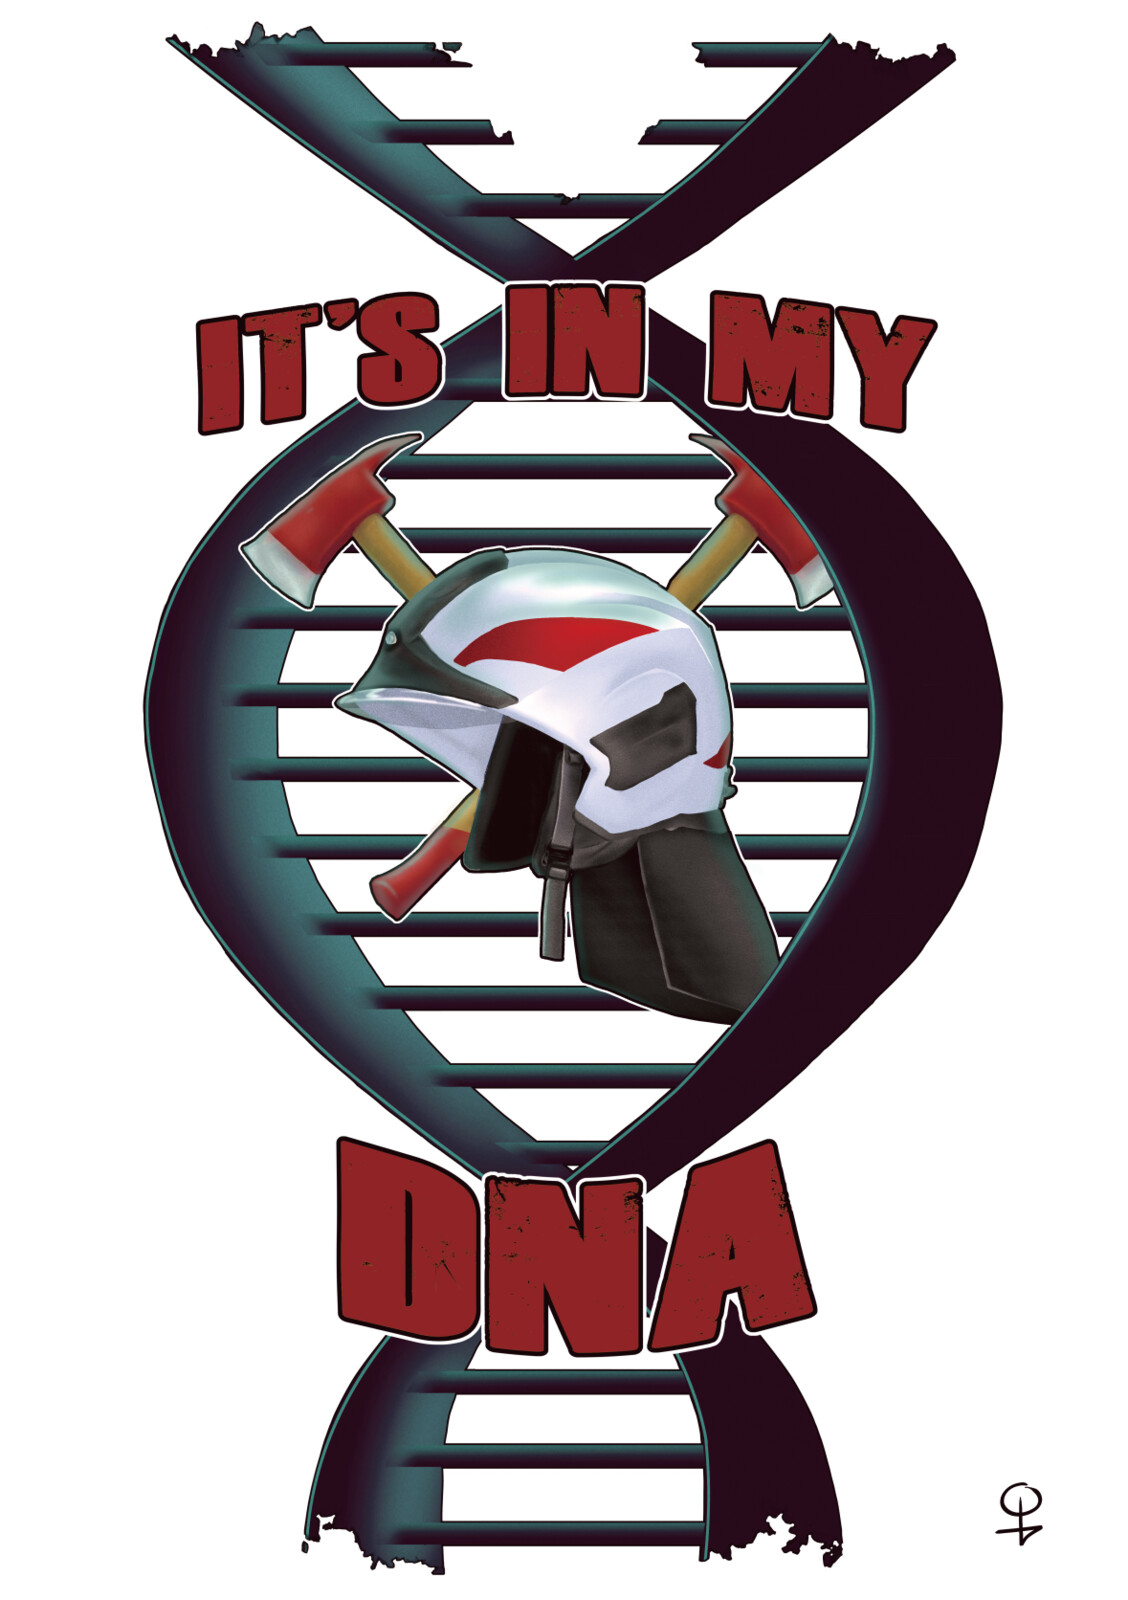 Second version with the DNA strand (white helmet)